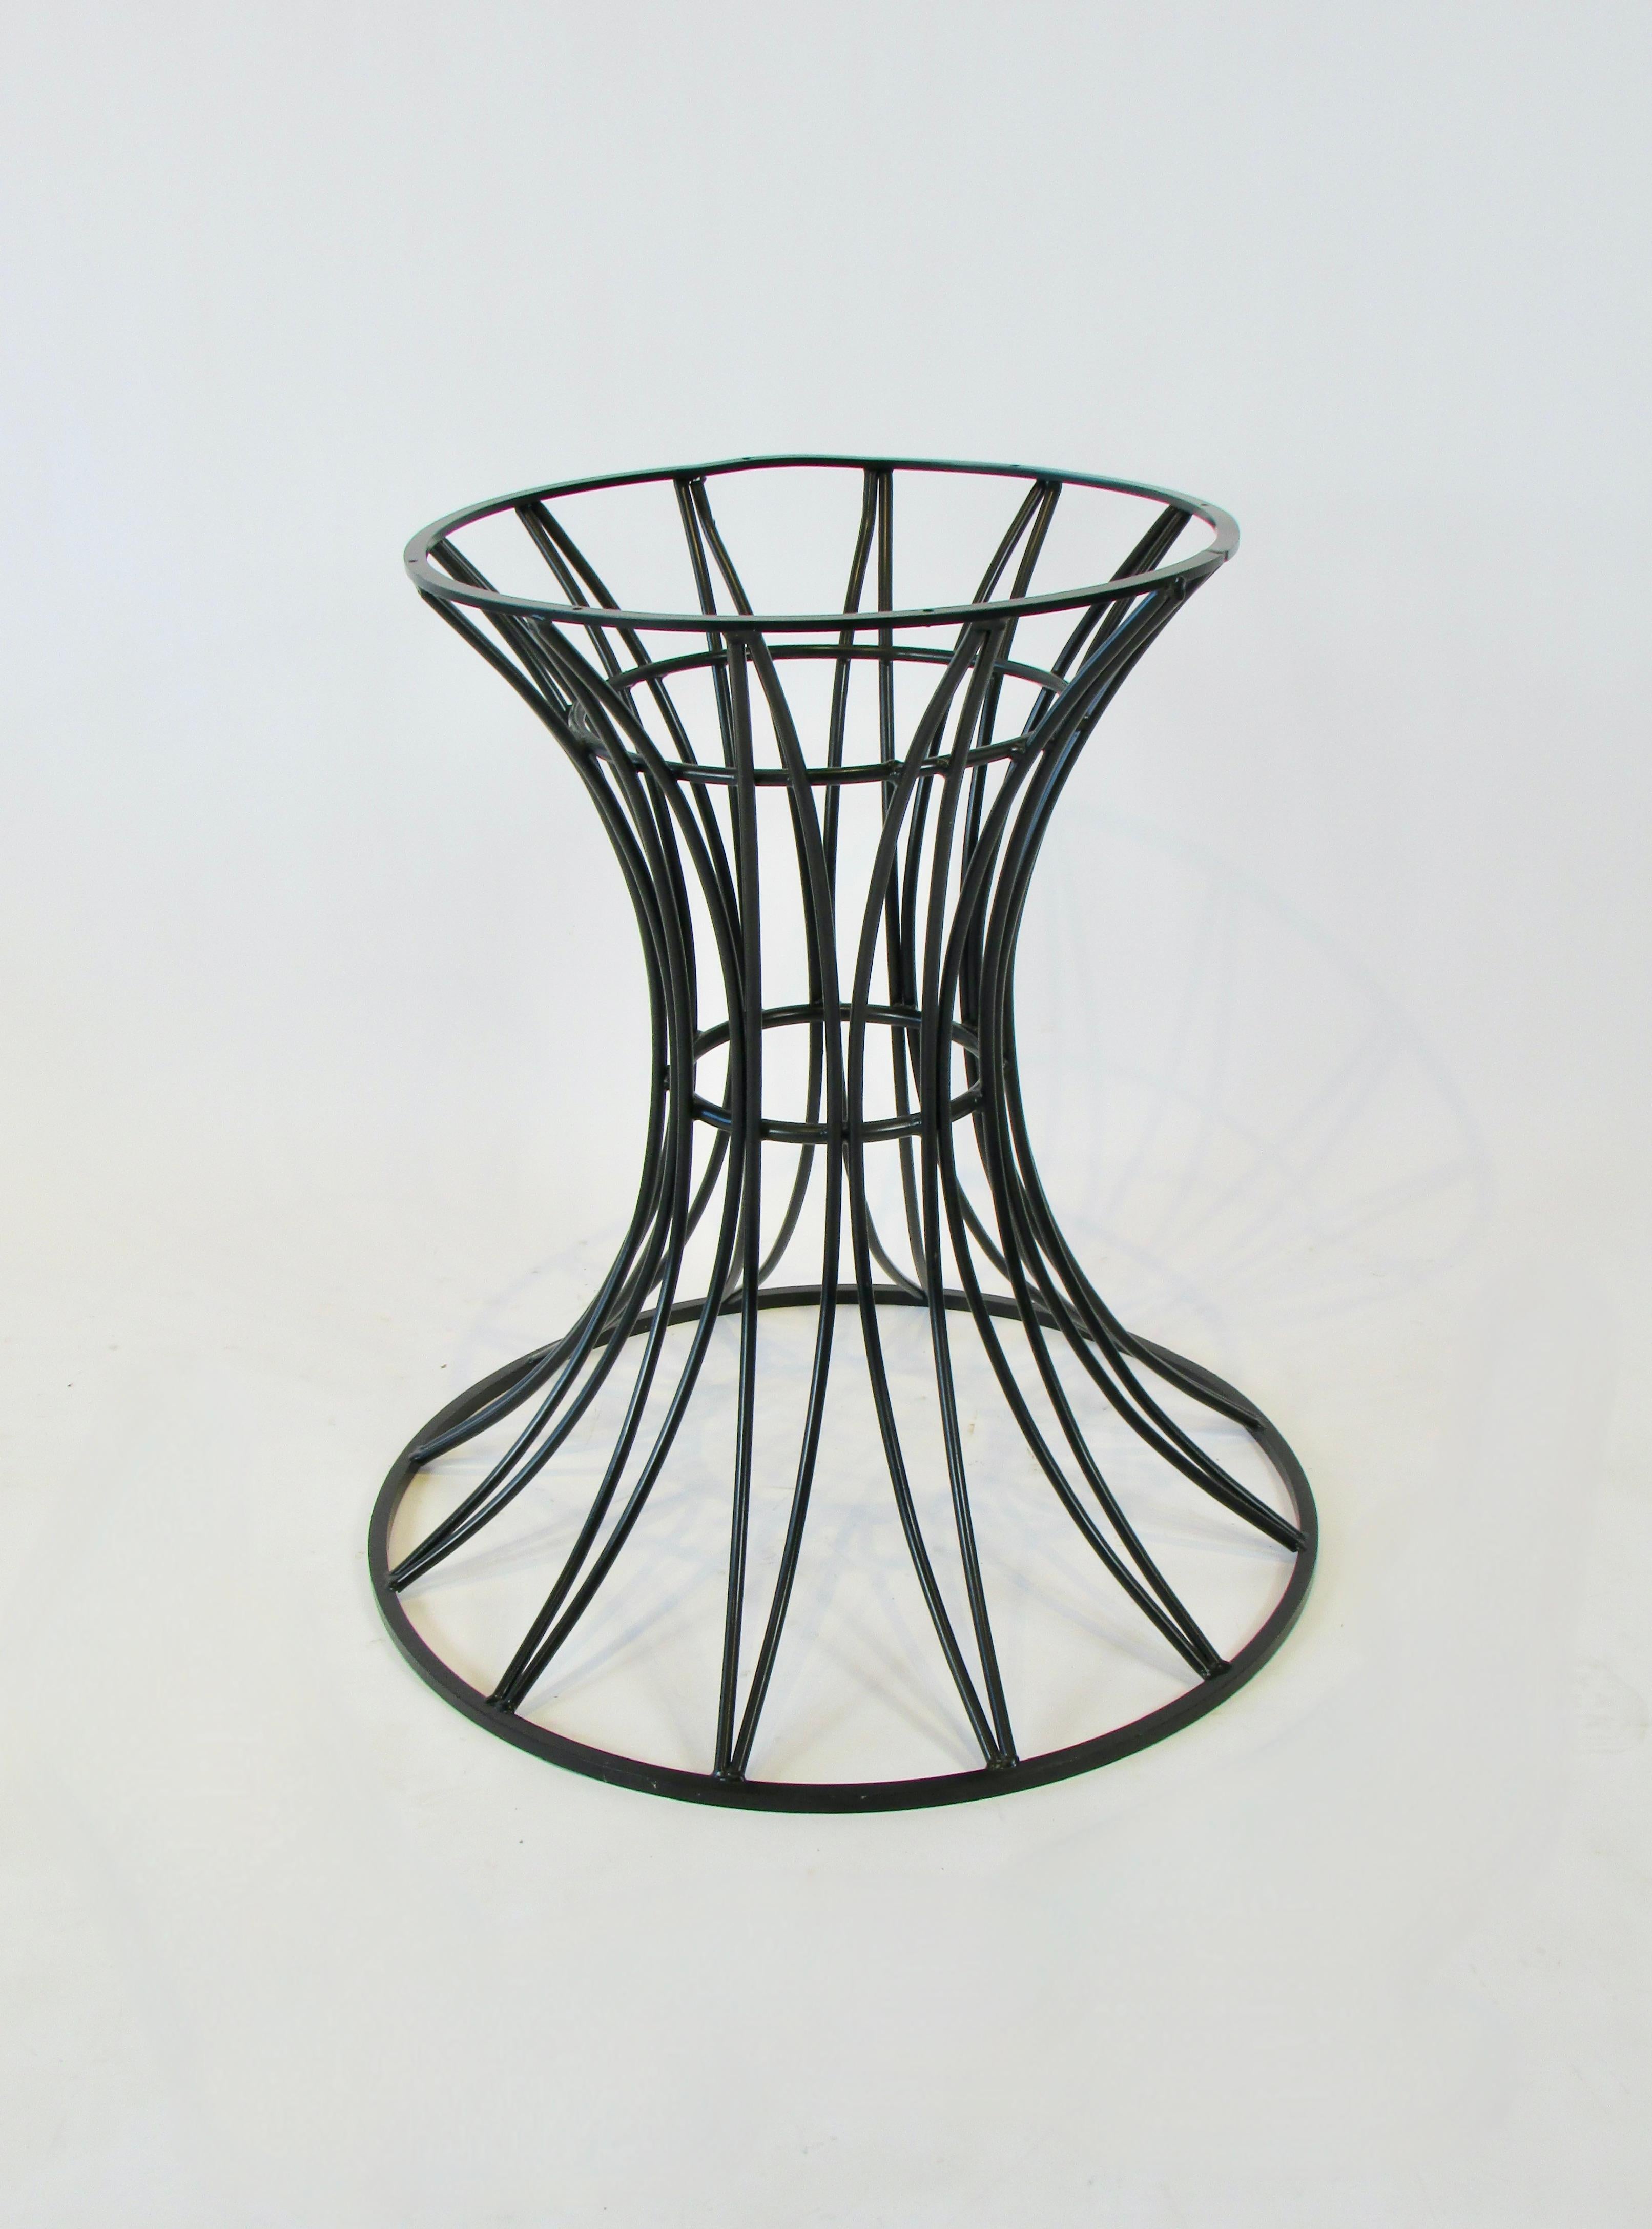 Hour glass form dining table base . round steel rods curve up from 25.5 
' diameter base to more narrow 19